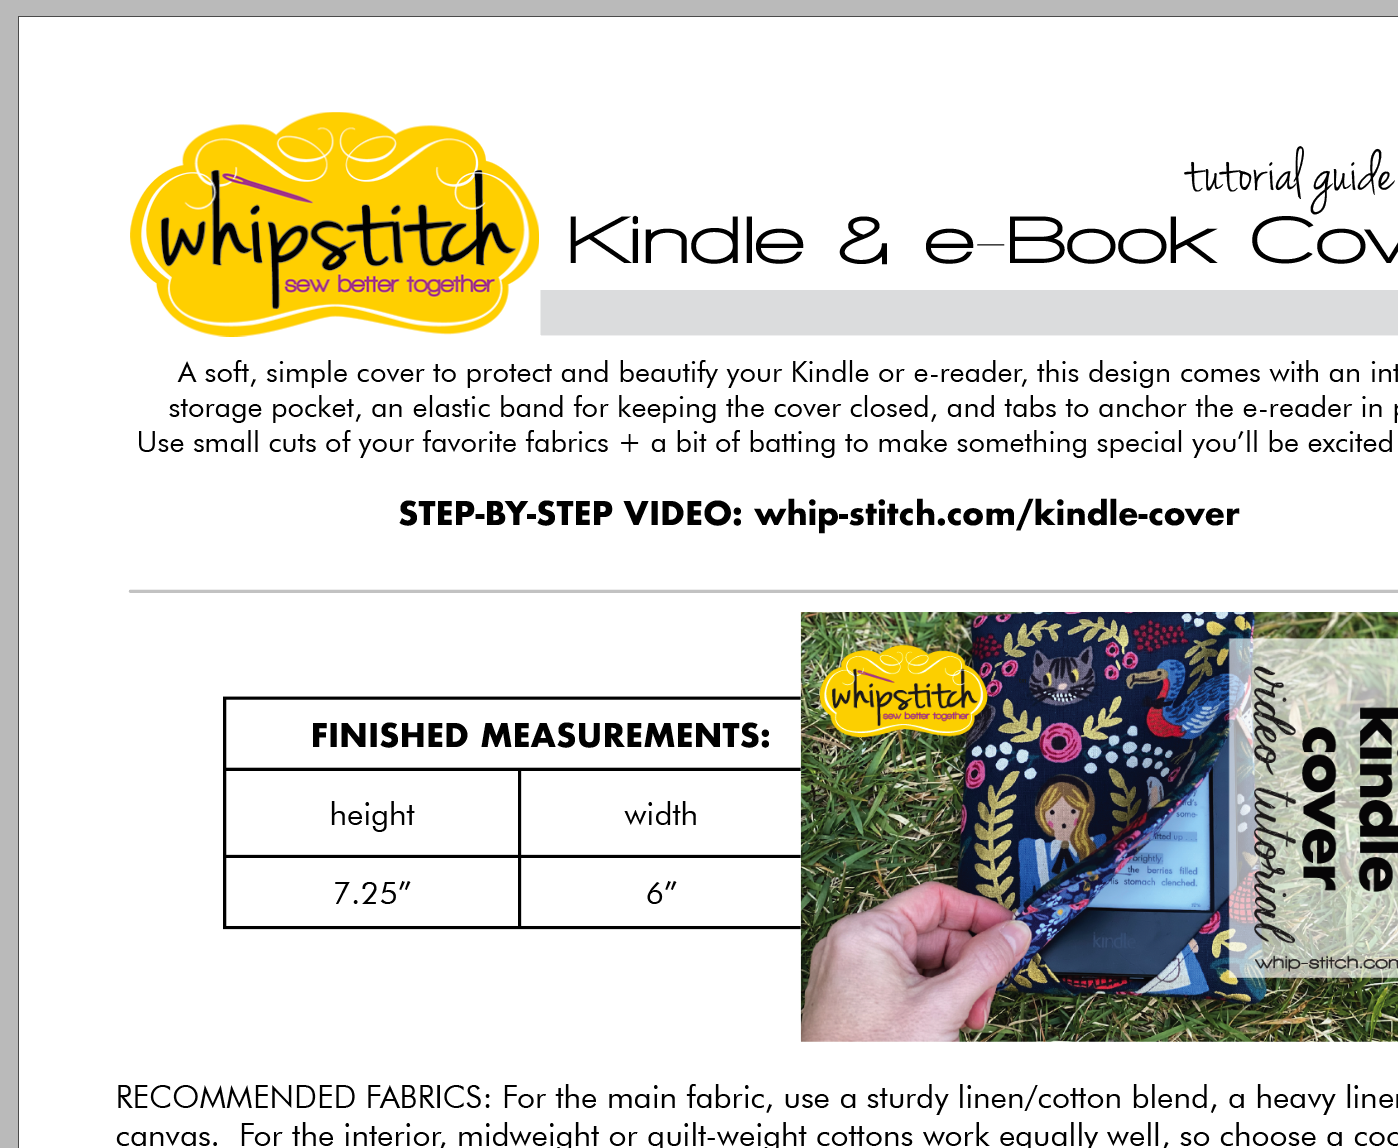 HOW TO SHARE BOOKS ON KINDLE: A Visual Tutorial On How To Share